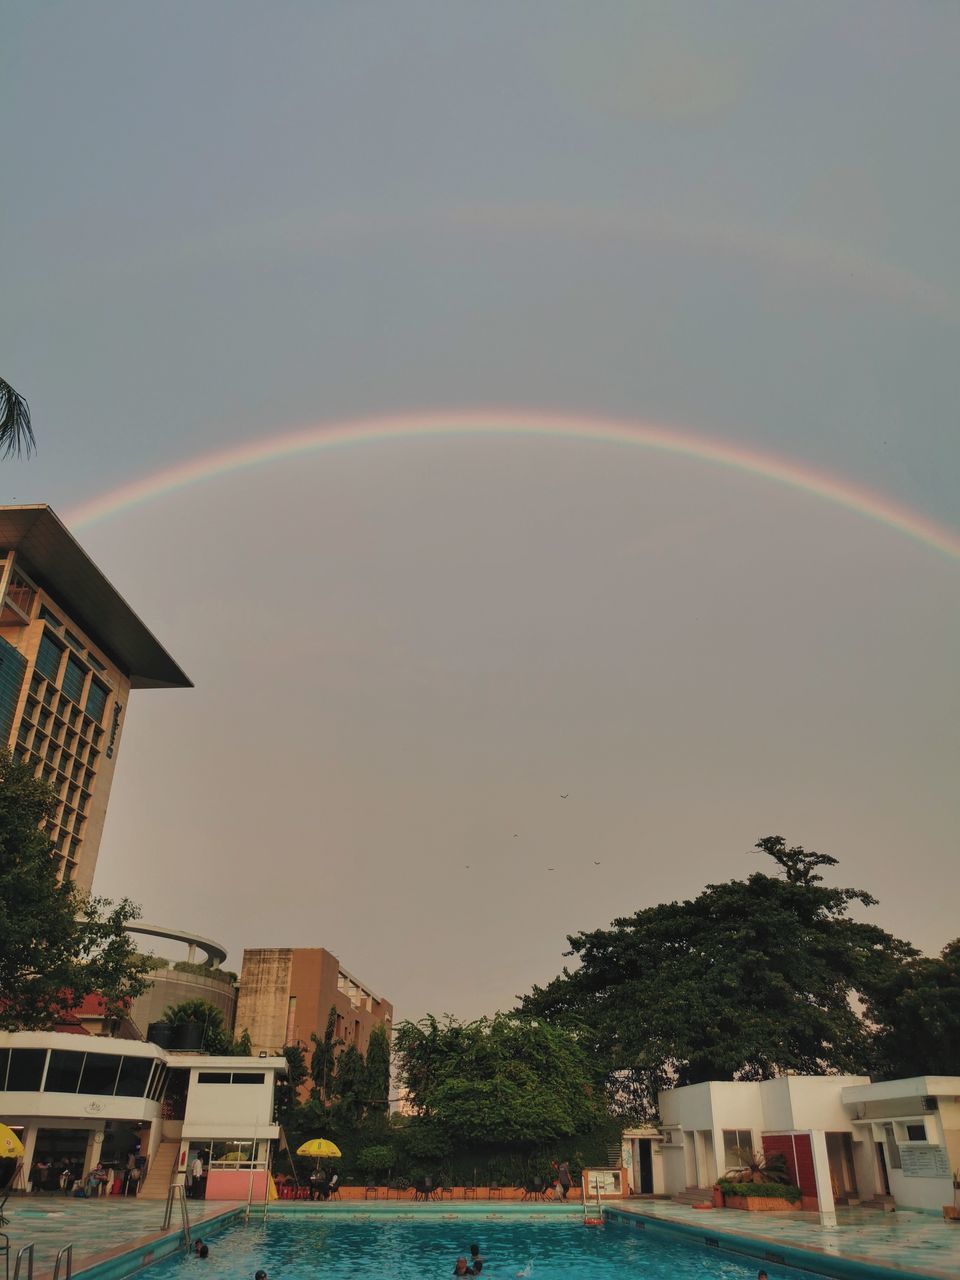 SCENIC VIEW OF RAINBOW OVER BUILDINGS IN CITY